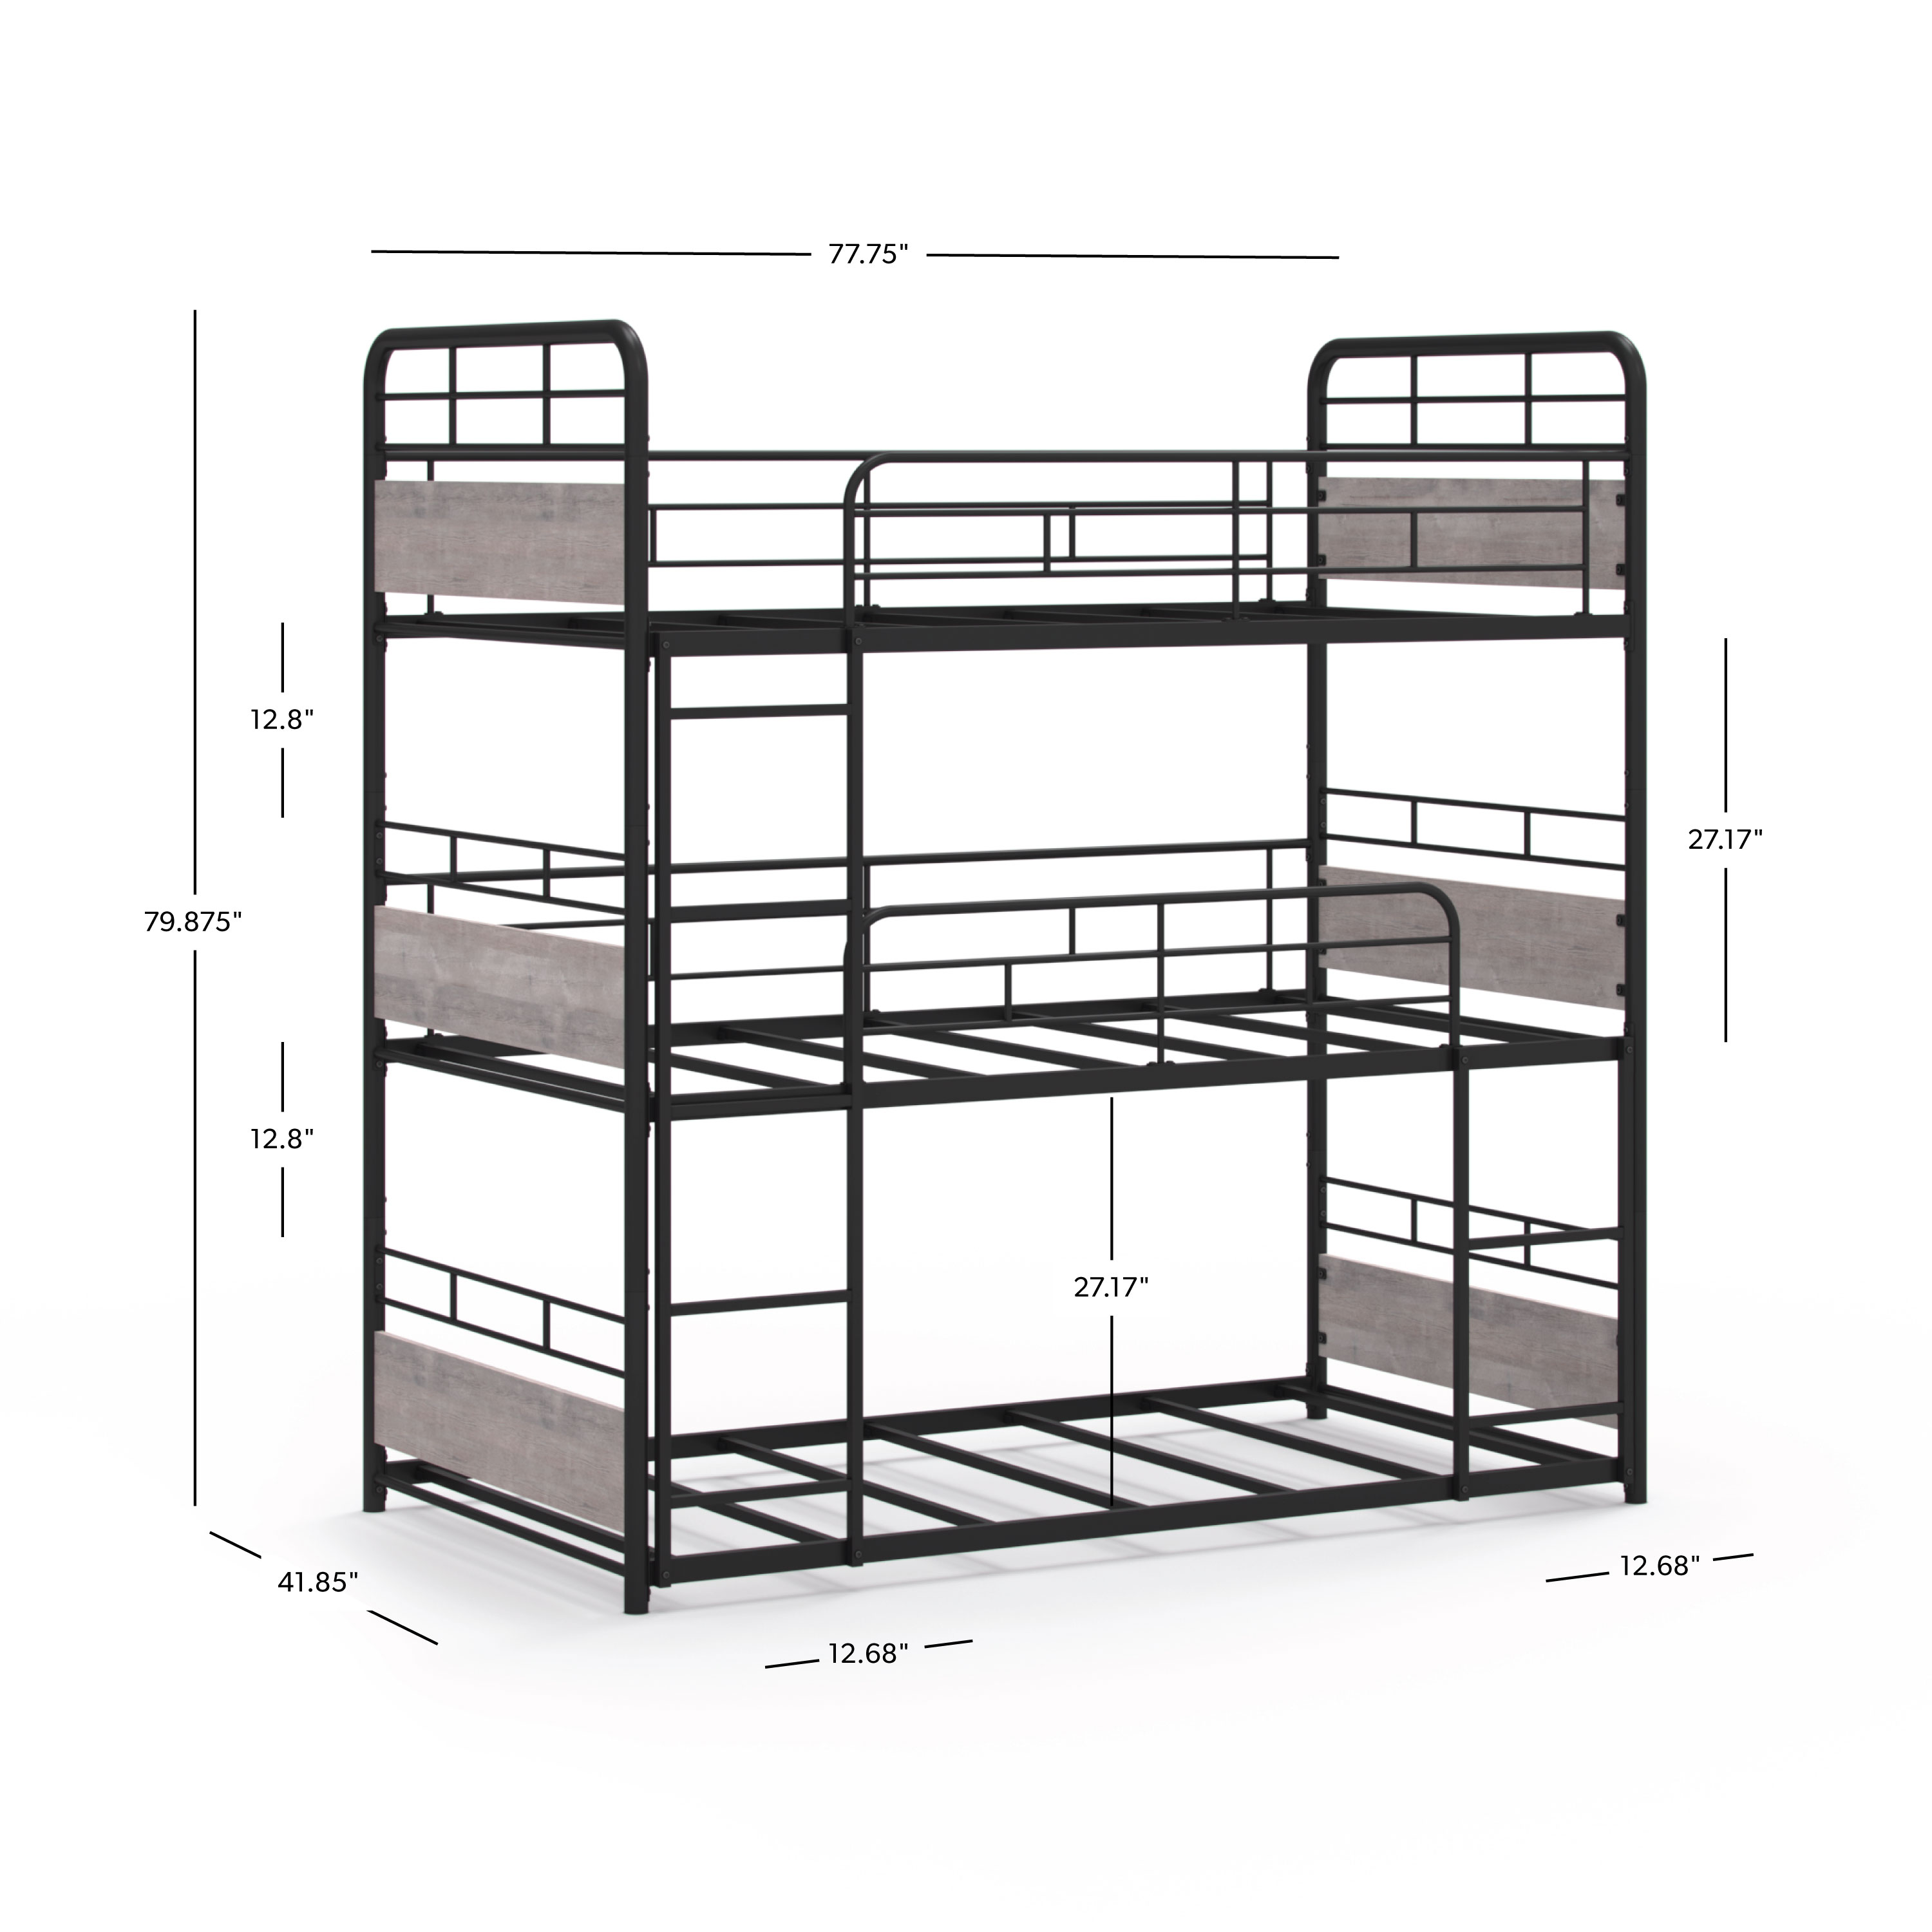 Better Homes & Gardens Anniston Convertible Black Metal Triple Twin Bunk Bed, Gray Wood Accents - image 2 of 26